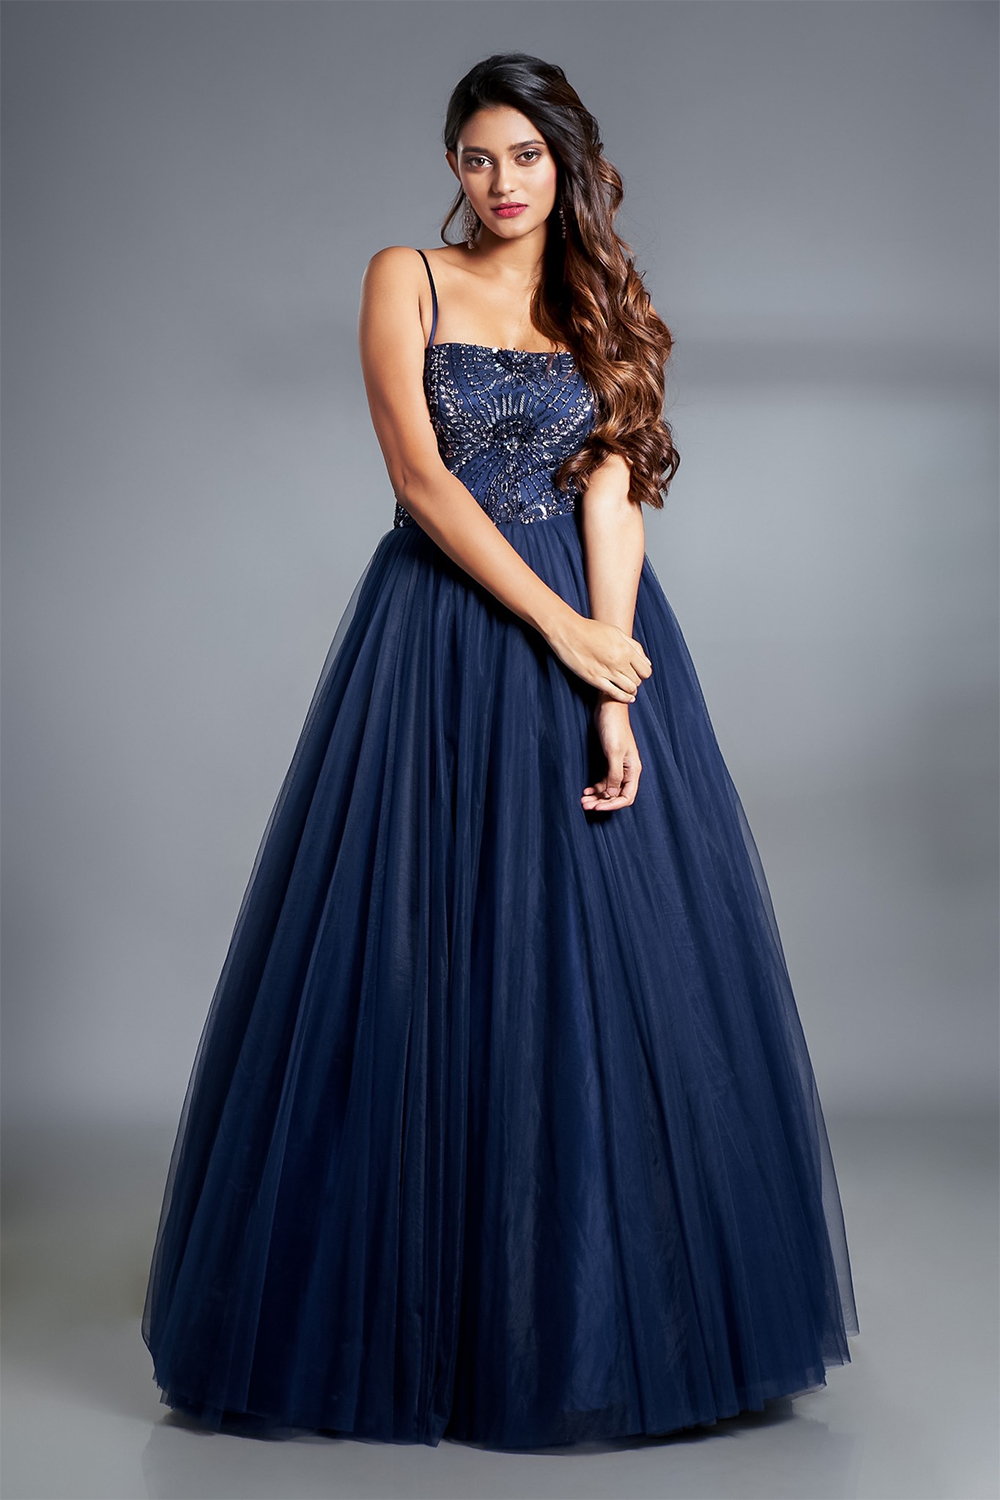 Elegant Blue Gowns - Royal and Serene Collection - Seasons India